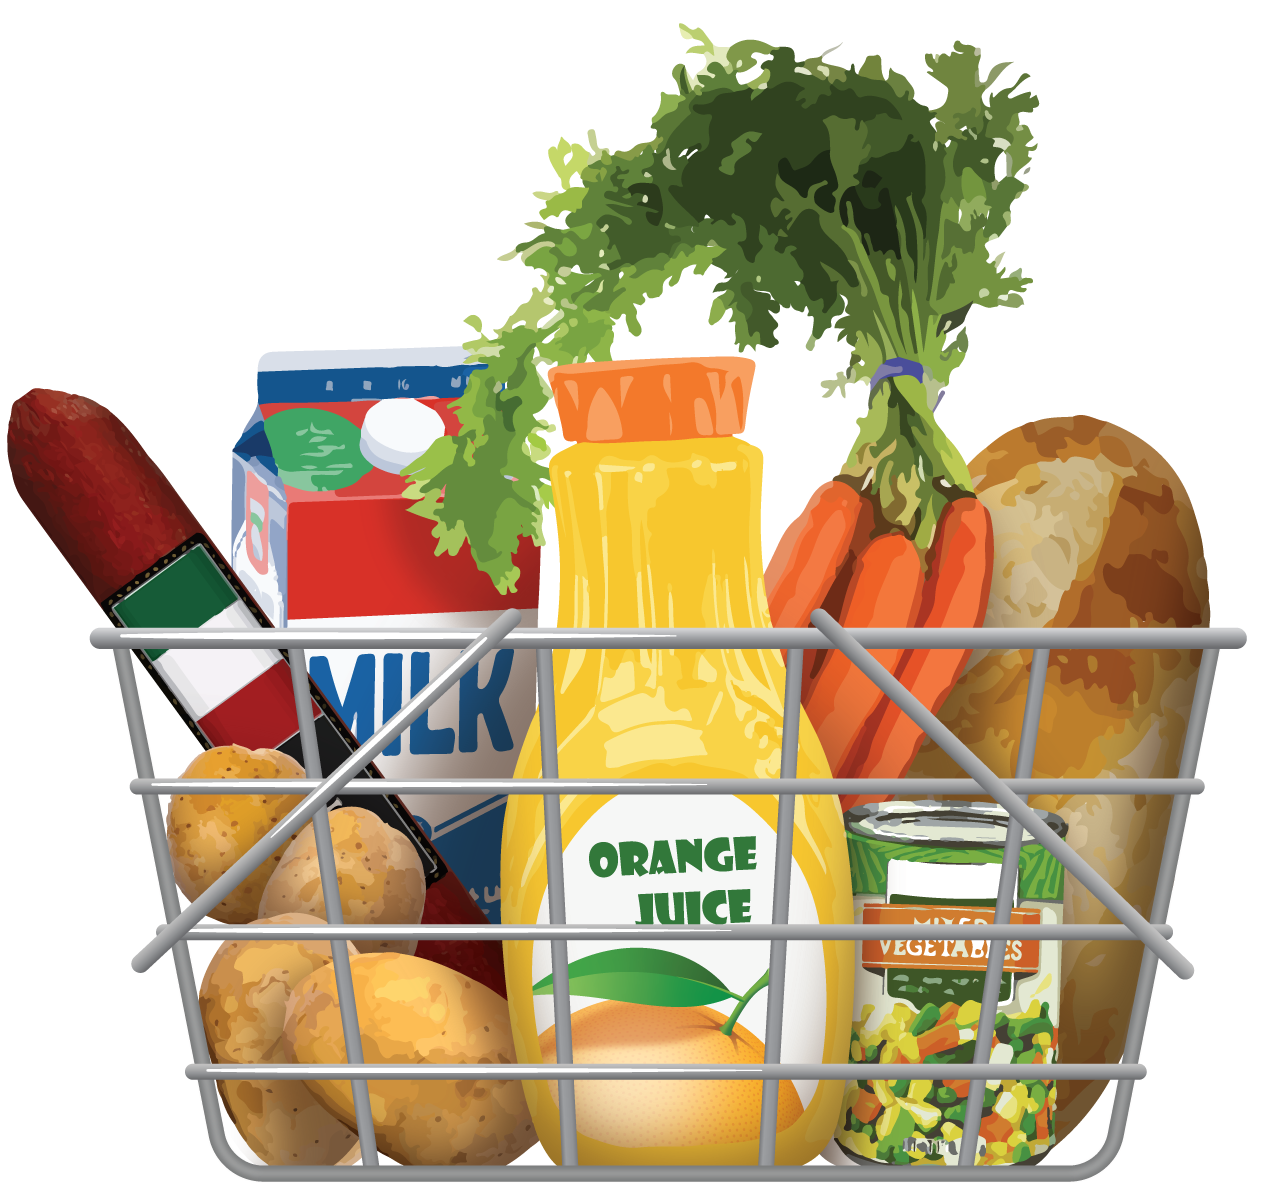 Shopping basket. Potatoes, 4. Sausage, 1. Milk, 1. Orange juice, 1. Loaf of bread, 1. Can of mixed vegetables, 1. Carrots, a bunch.